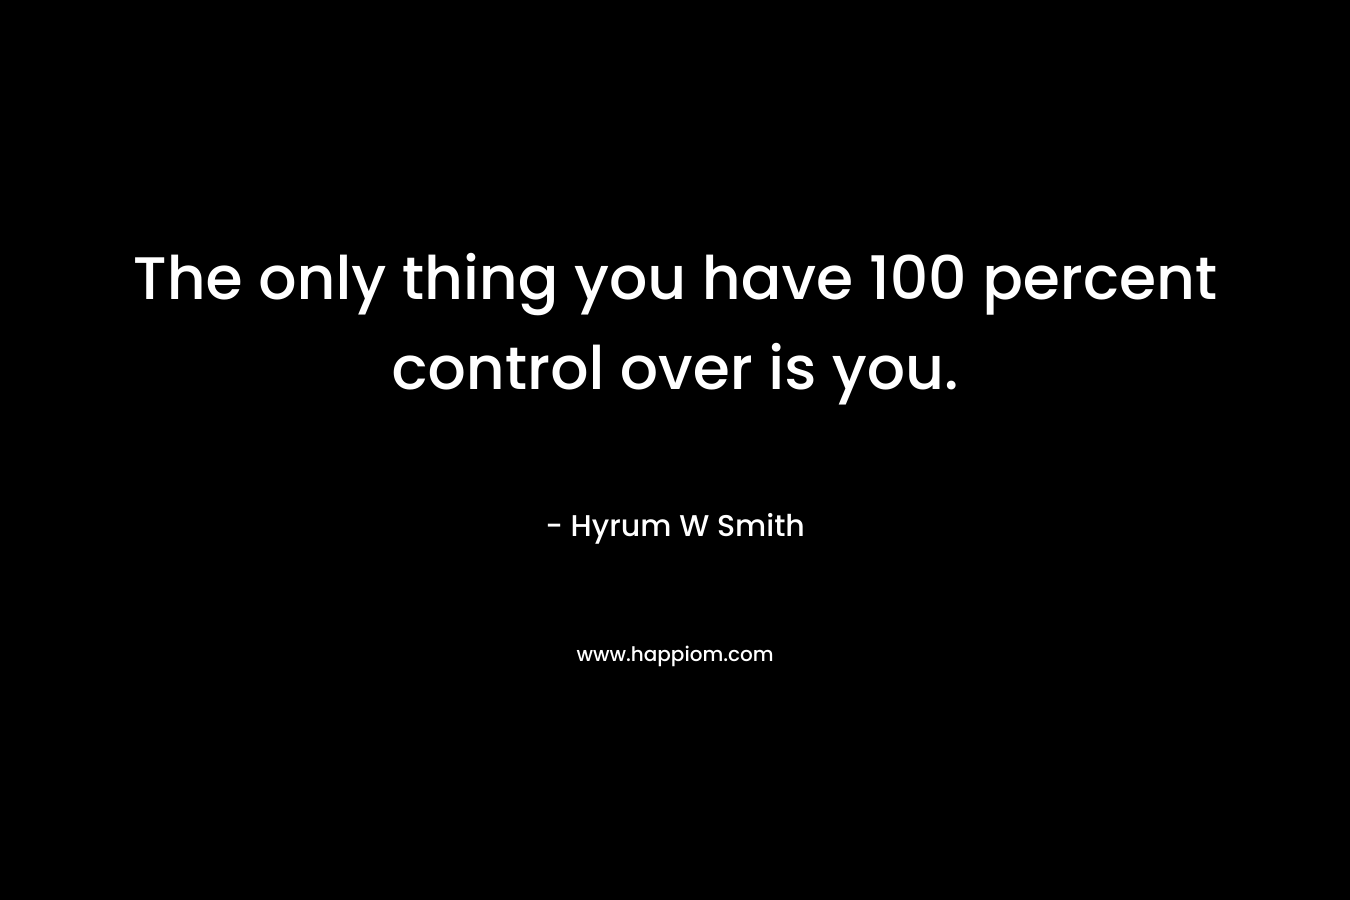 The only thing you have 100 percent control over is you. – Hyrum W Smith